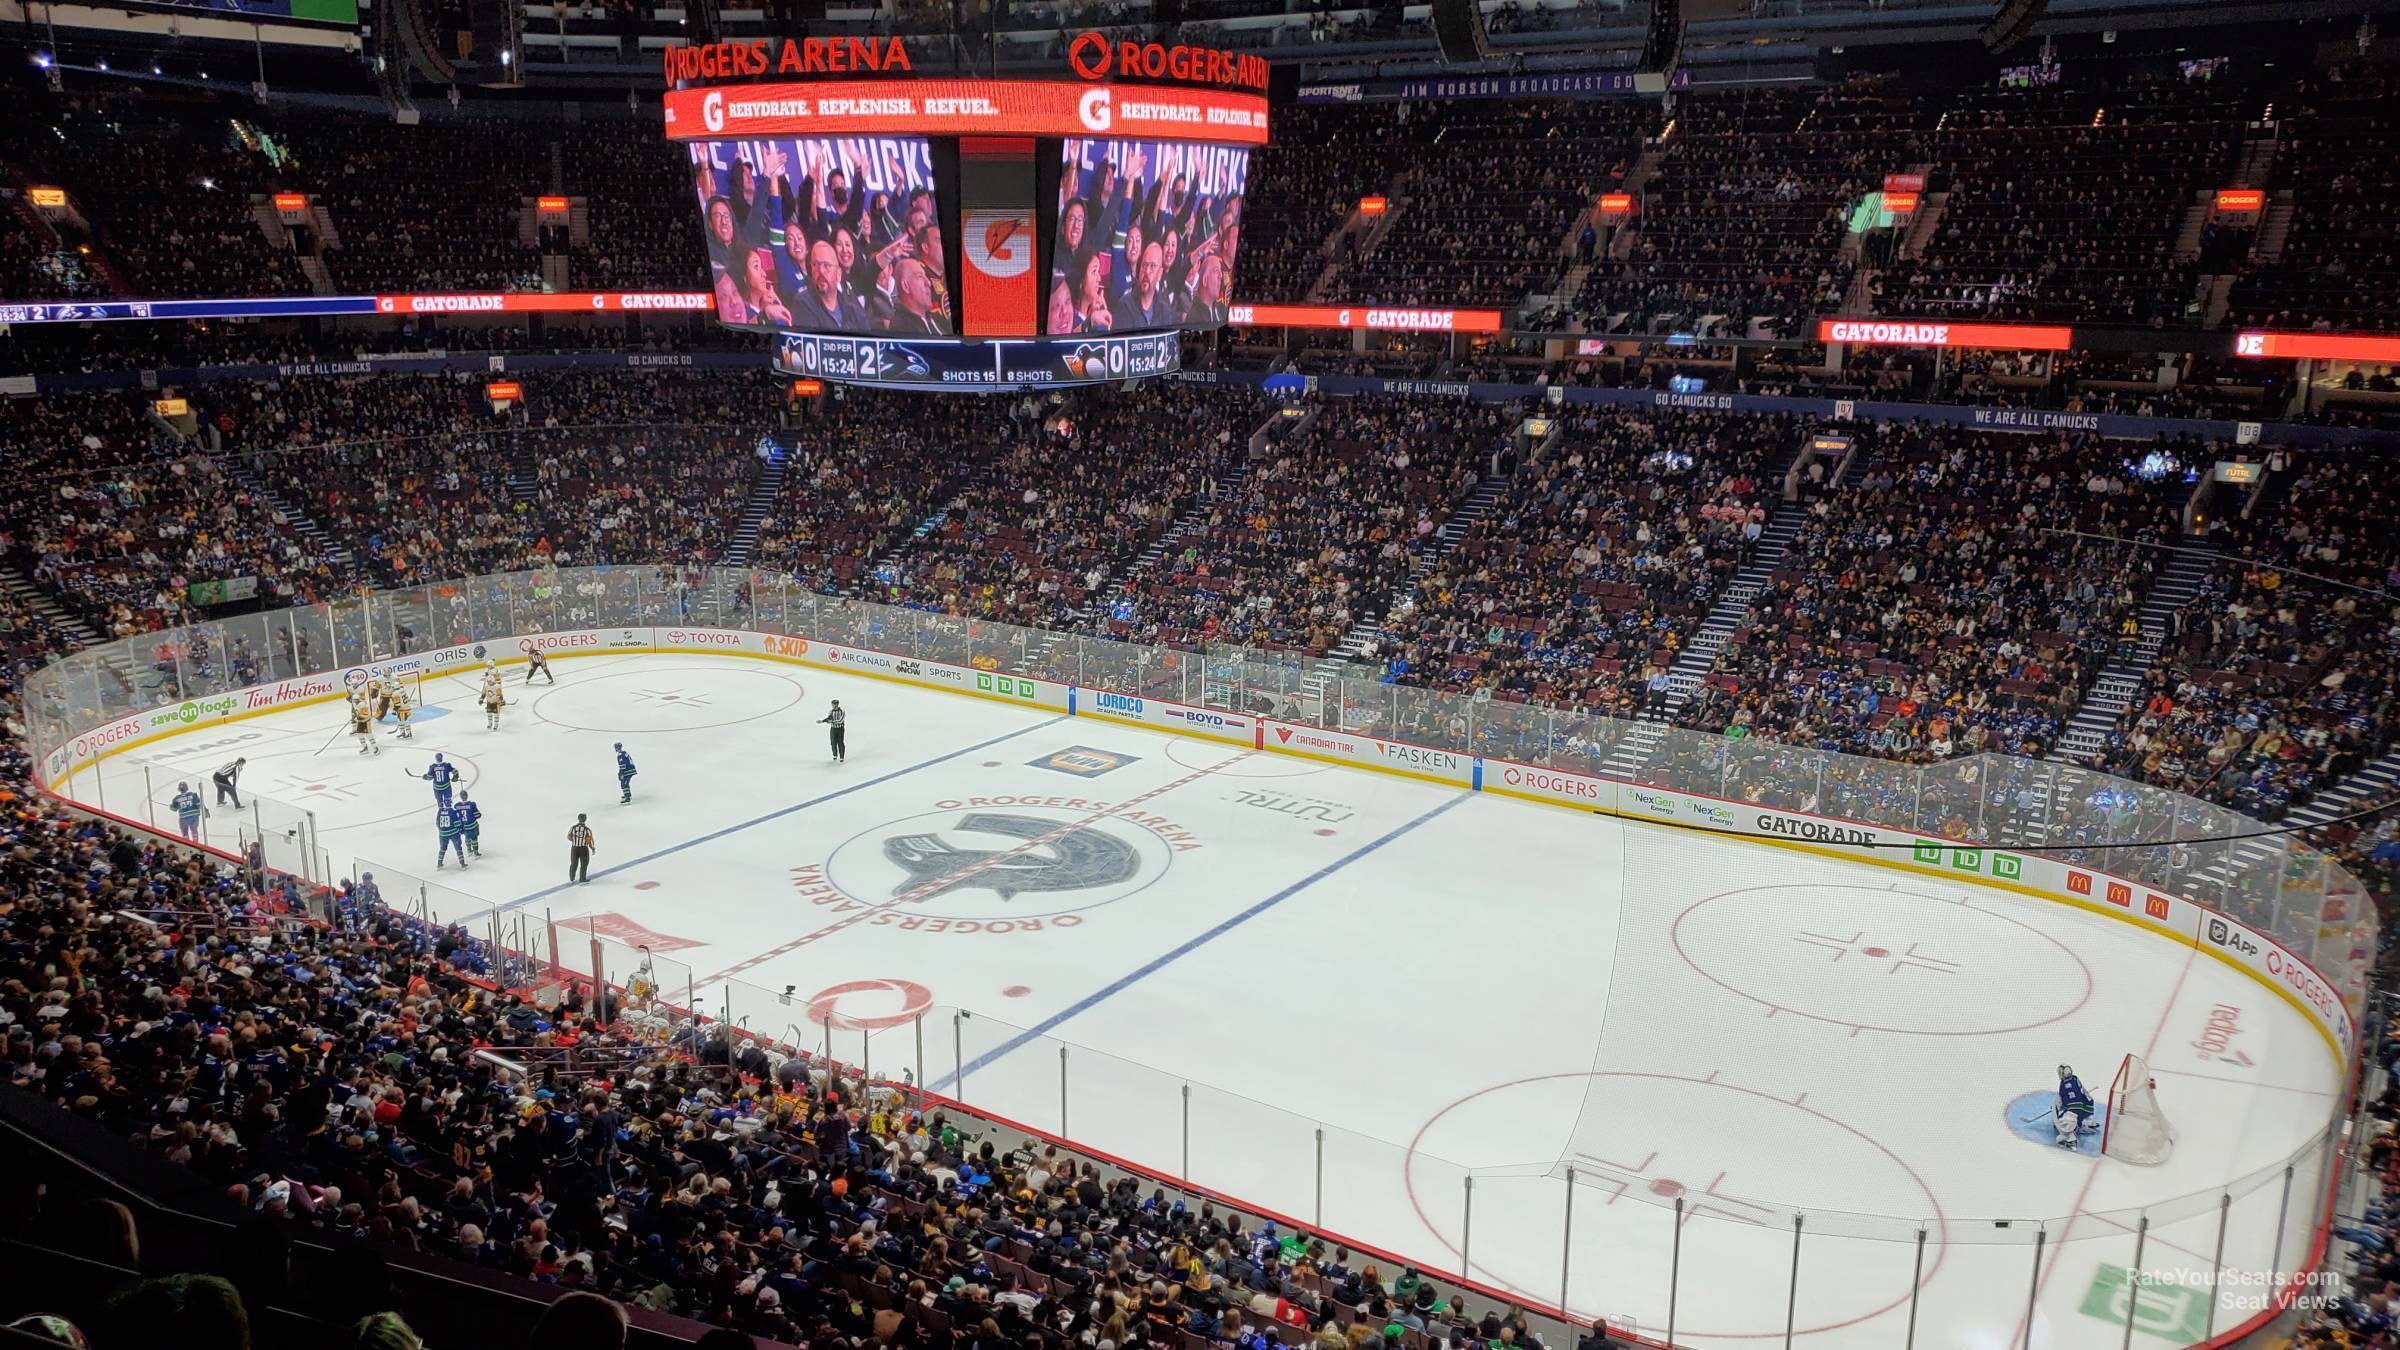 section 320, row 4 seat view  for hockey - rogers arena